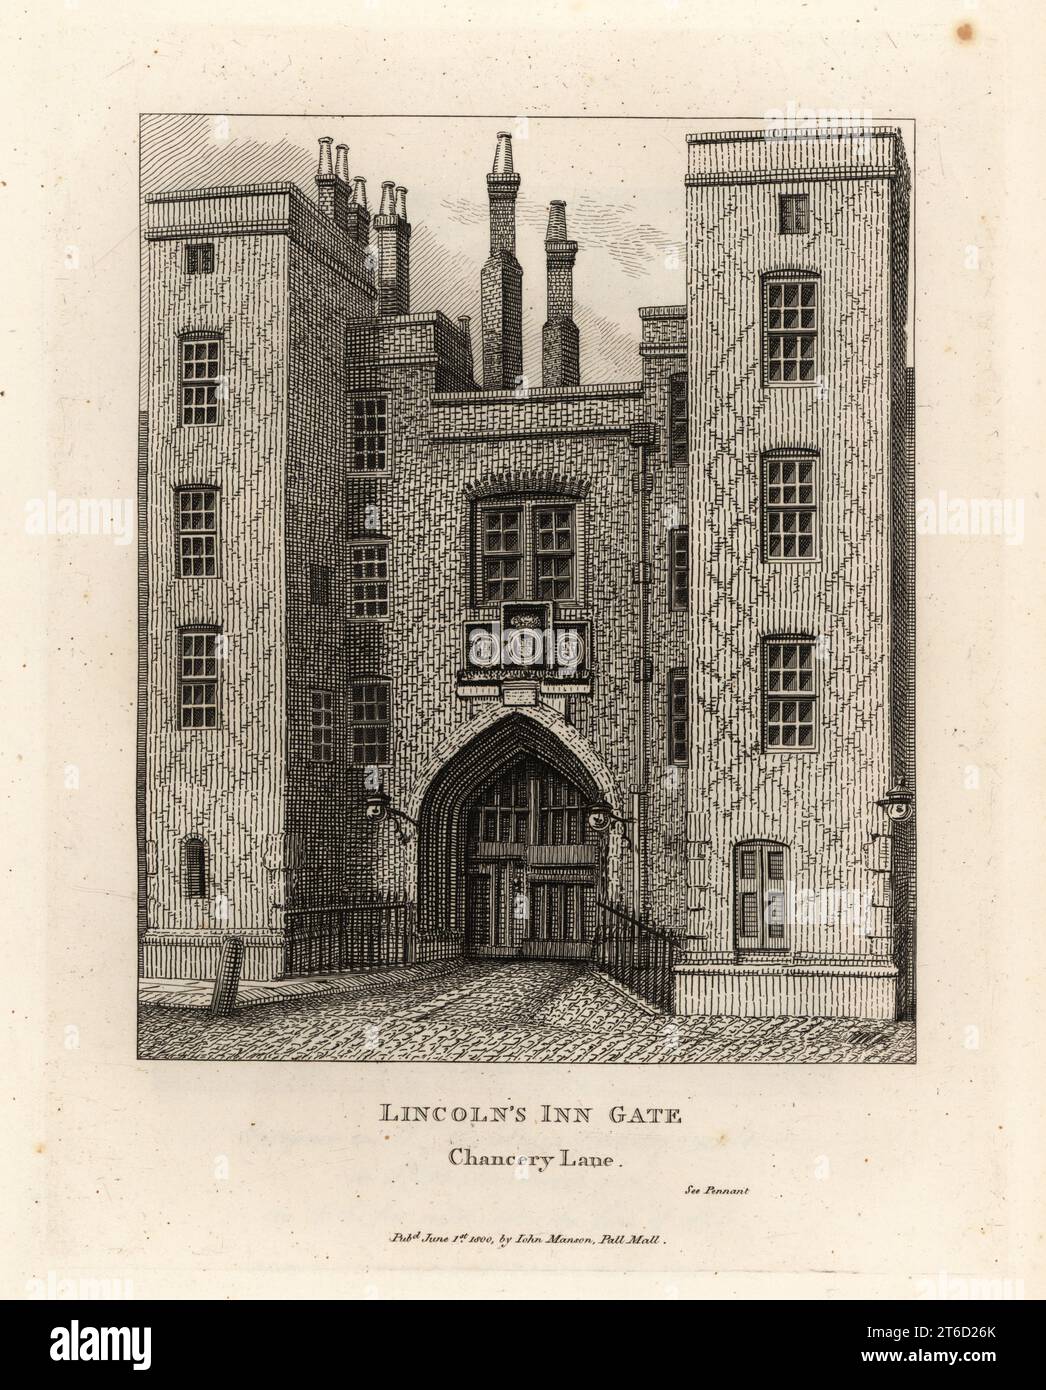 Lincolns Inn Gate, Chancery Lane, London. One of the four Inns of Court in London built in the 15th century. Copperplate engraving by John Thomas Smith after original drawings by members of the Society of Antiquaries from his J.T. Smiths Antiquities of London and its Environs, J. Sewell, R. Folder, J. Simco, London, 1800. Stock Photo